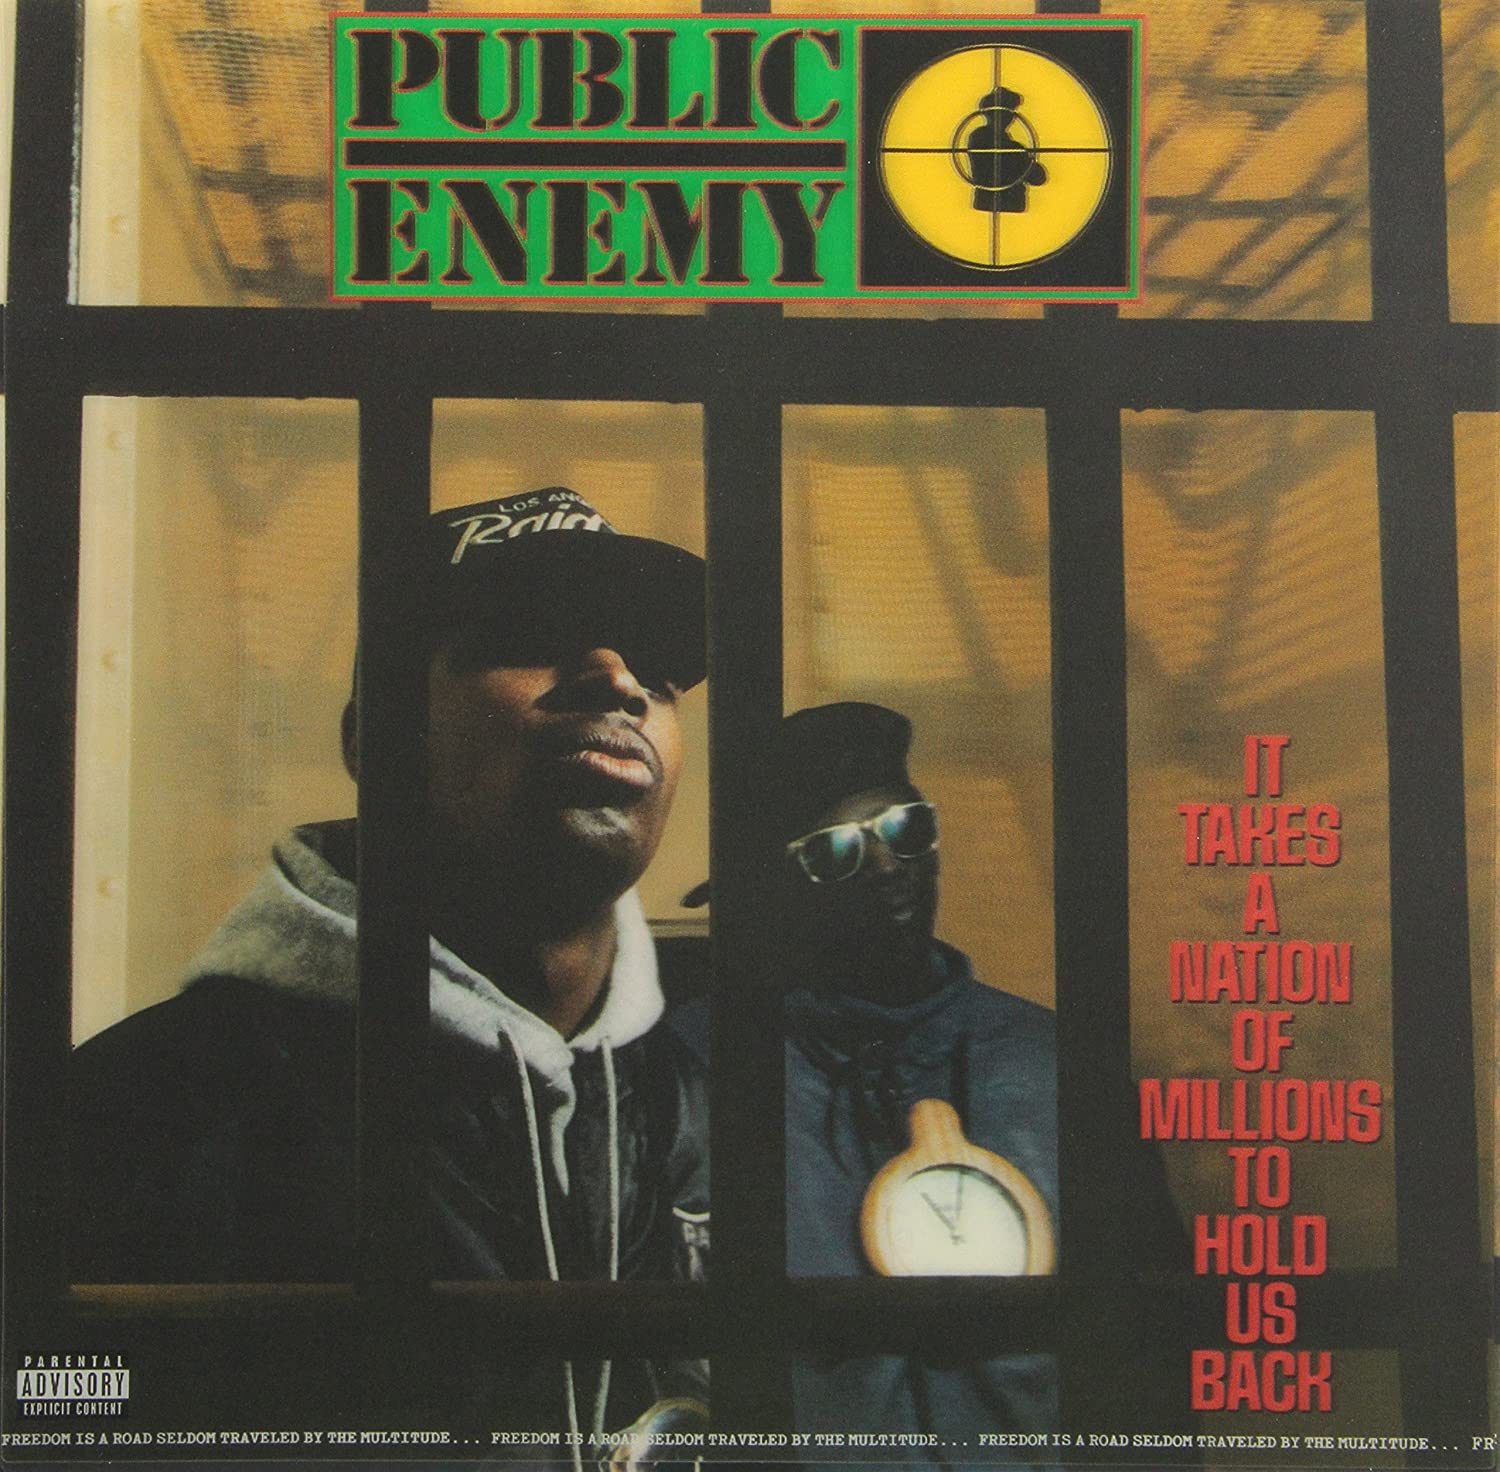 PUBLIC ENEMY - IT TAKES A NATION OF MILLIONS TO HOLD US BACK Vinyl LP